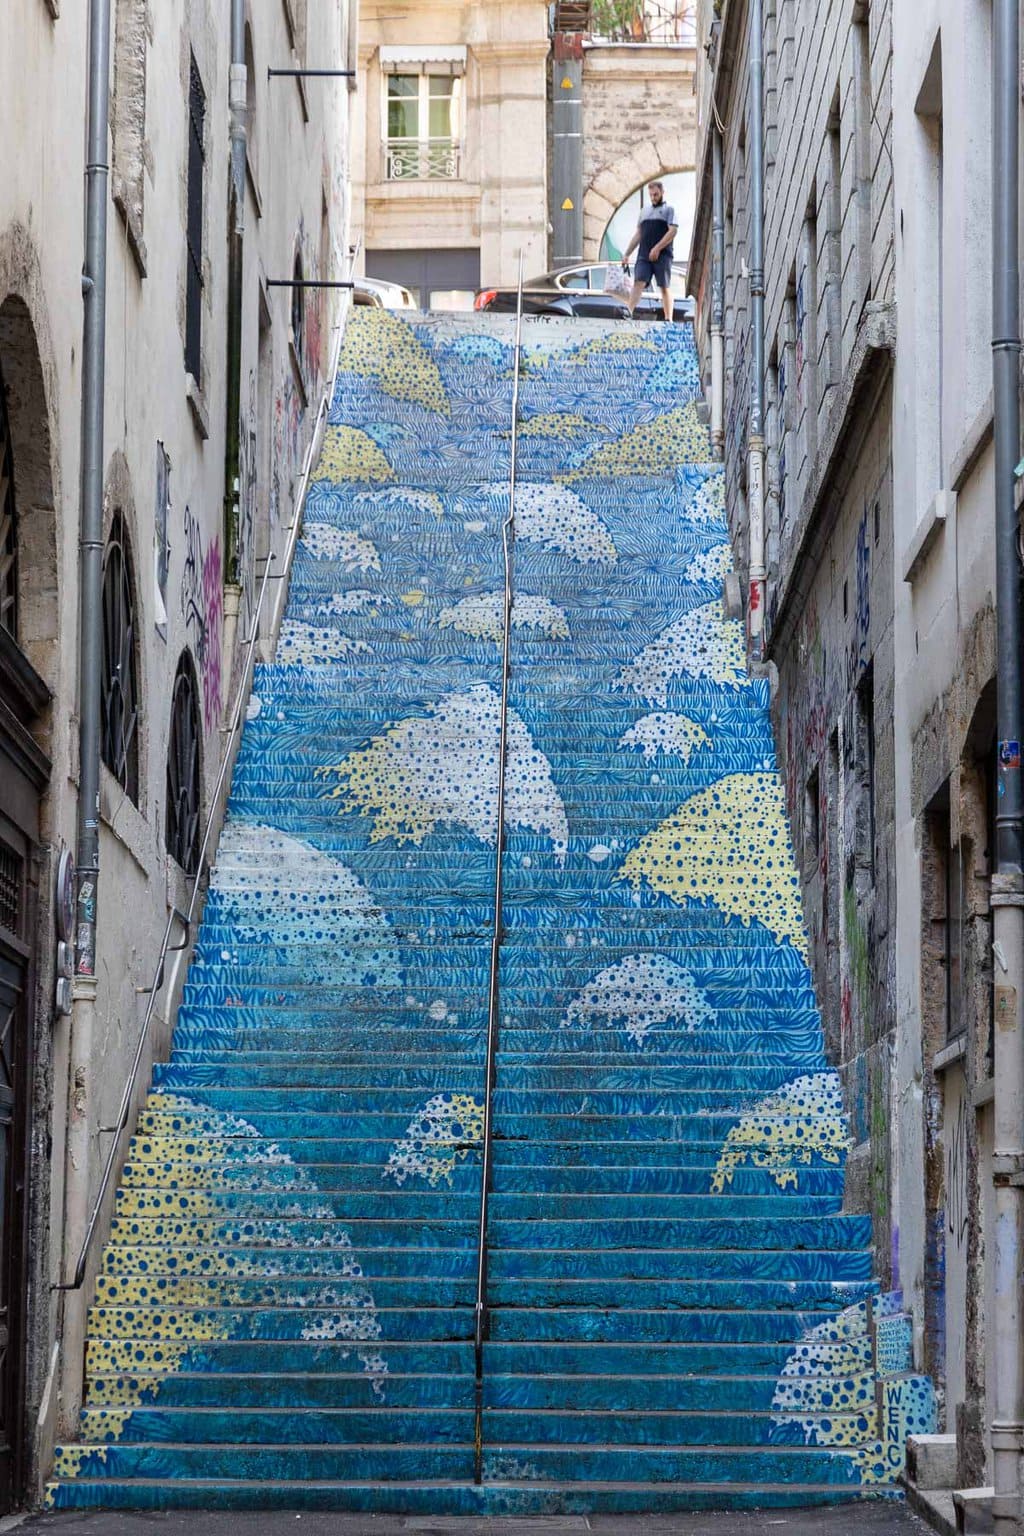 Vertical photo of decorated steps on the Croix Rousse part of Lyon.